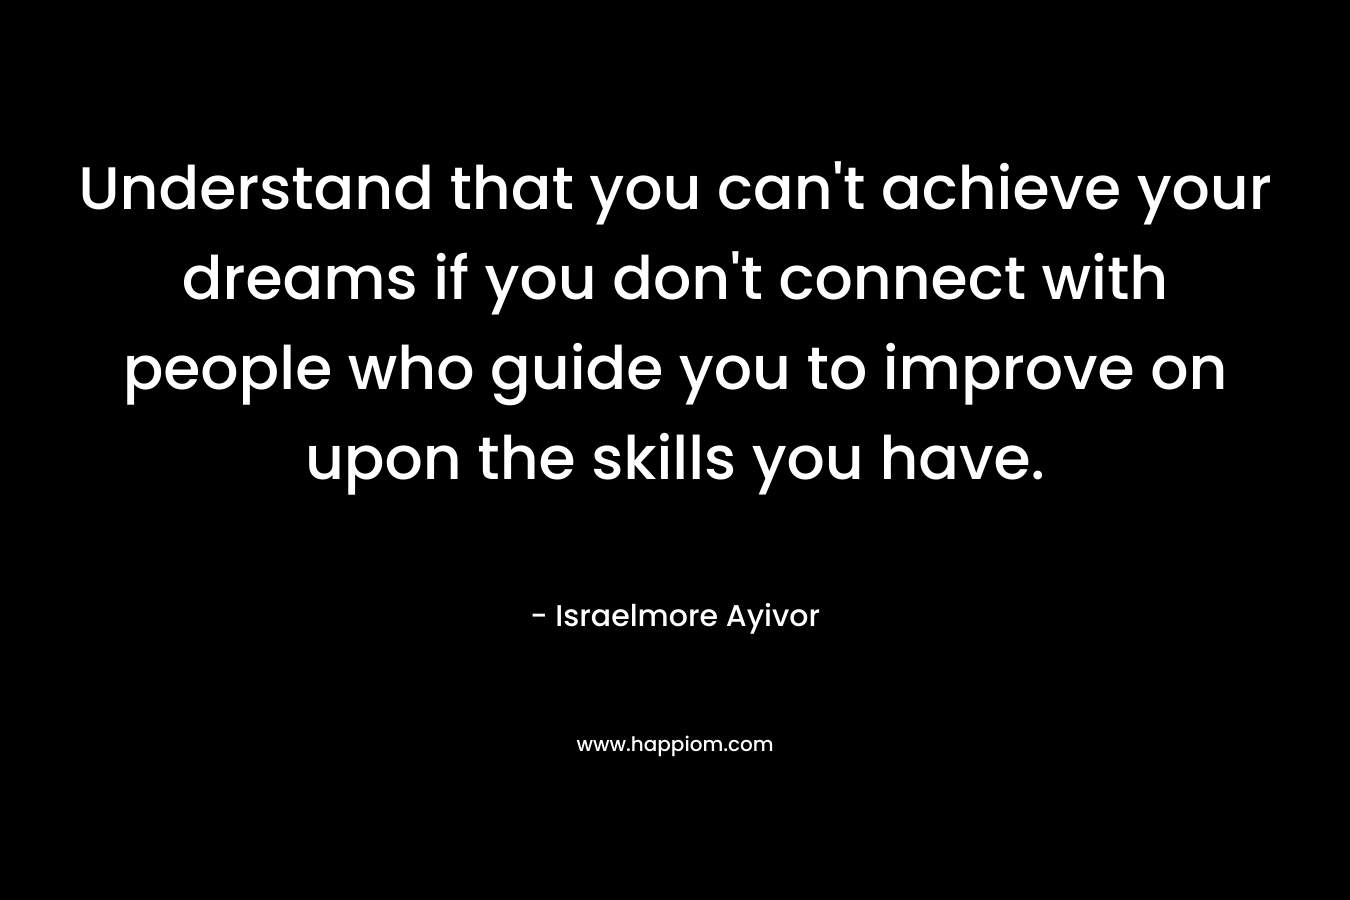 Understand that you can't achieve your dreams if you don't connect with people who guide you to improve on upon the skills you have.